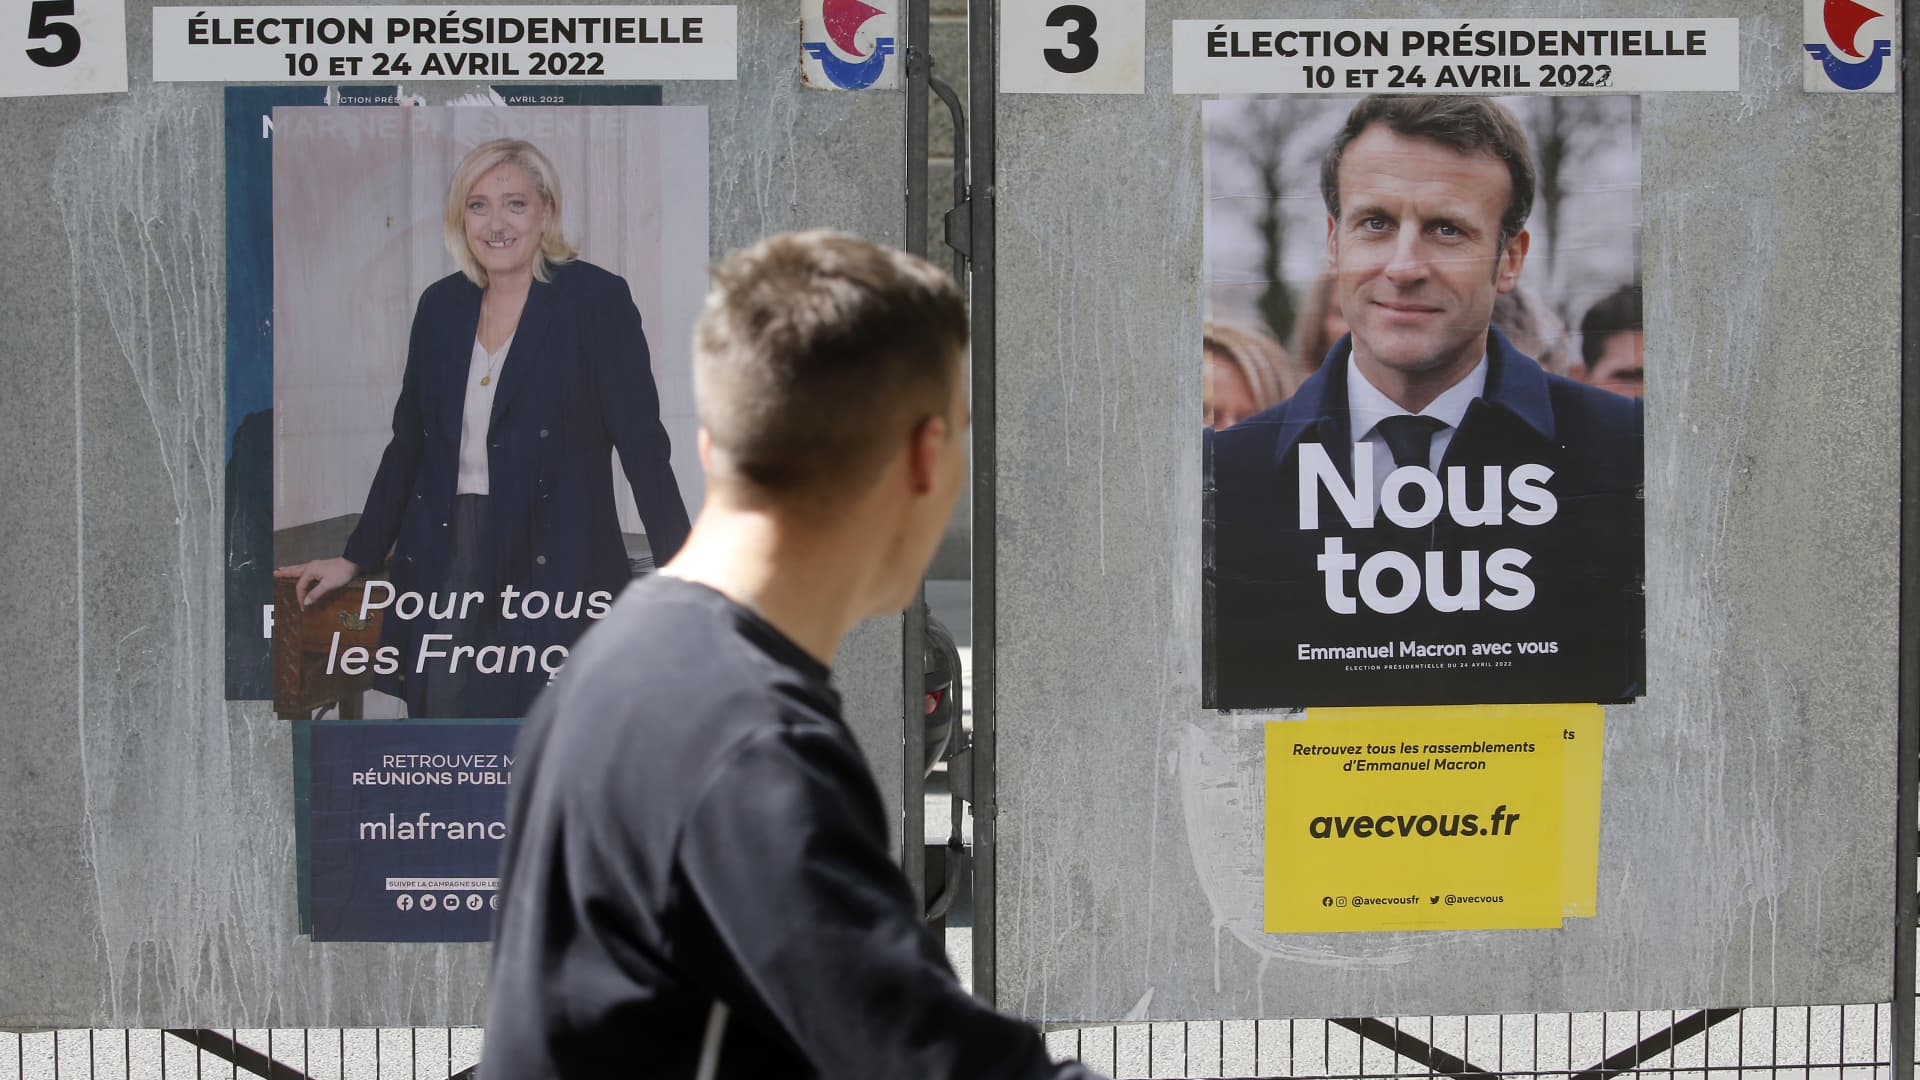 Macron faces off against far-right rival Le Pen as France heads to the polls